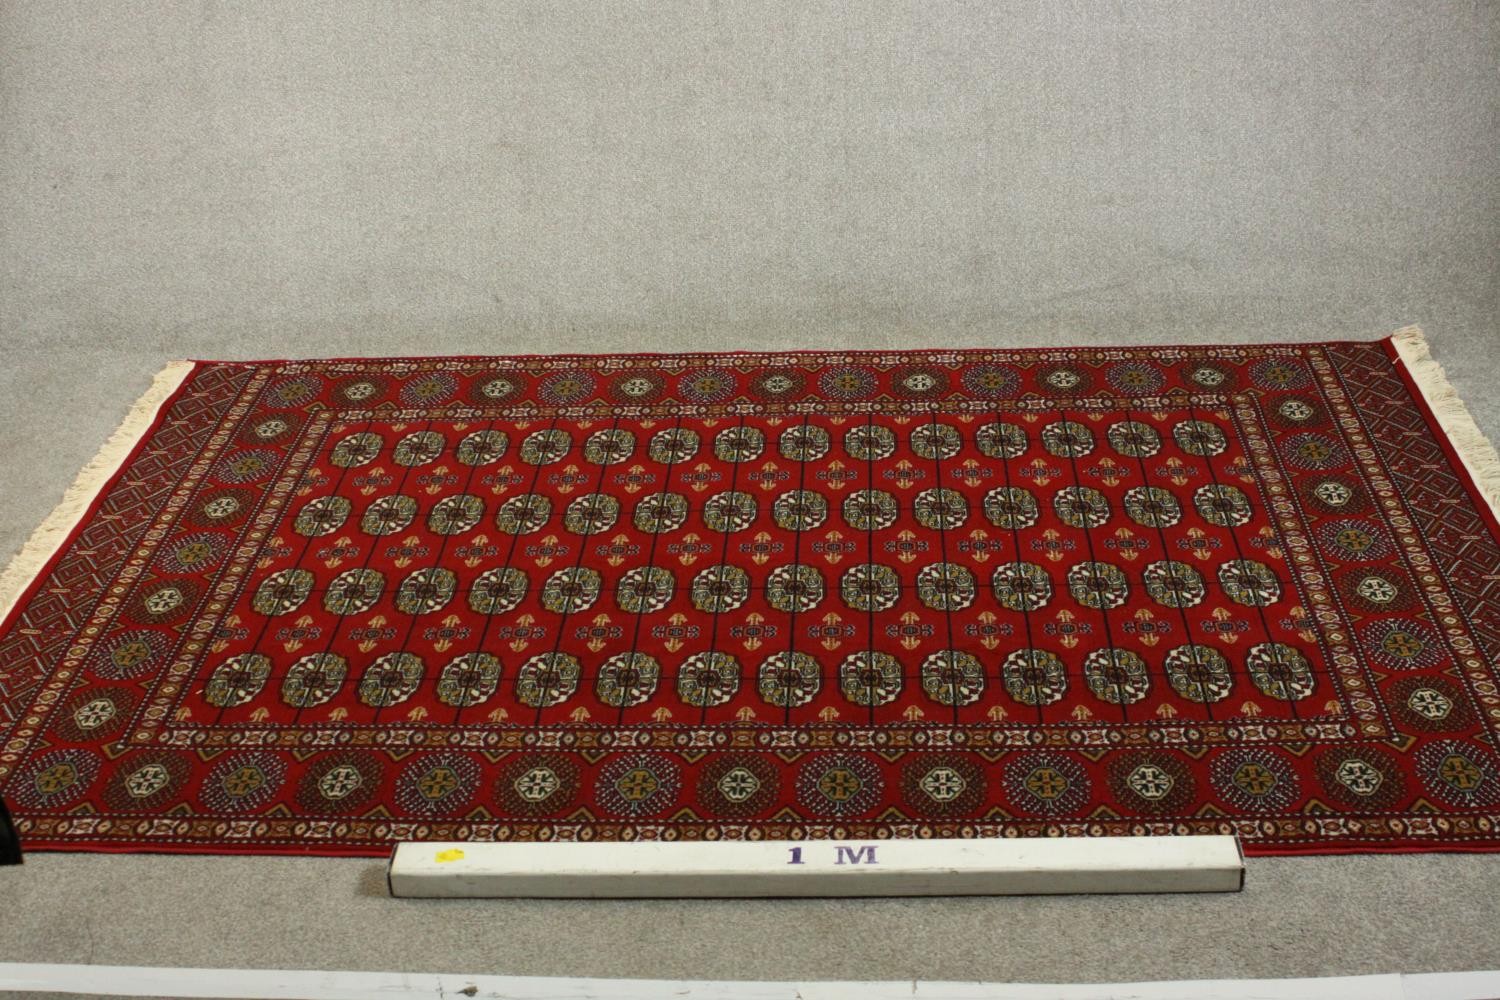 A Bokhara carpet with elephant's foot motifs on a burgundy ground within floral multiple borders. - Image 3 of 8